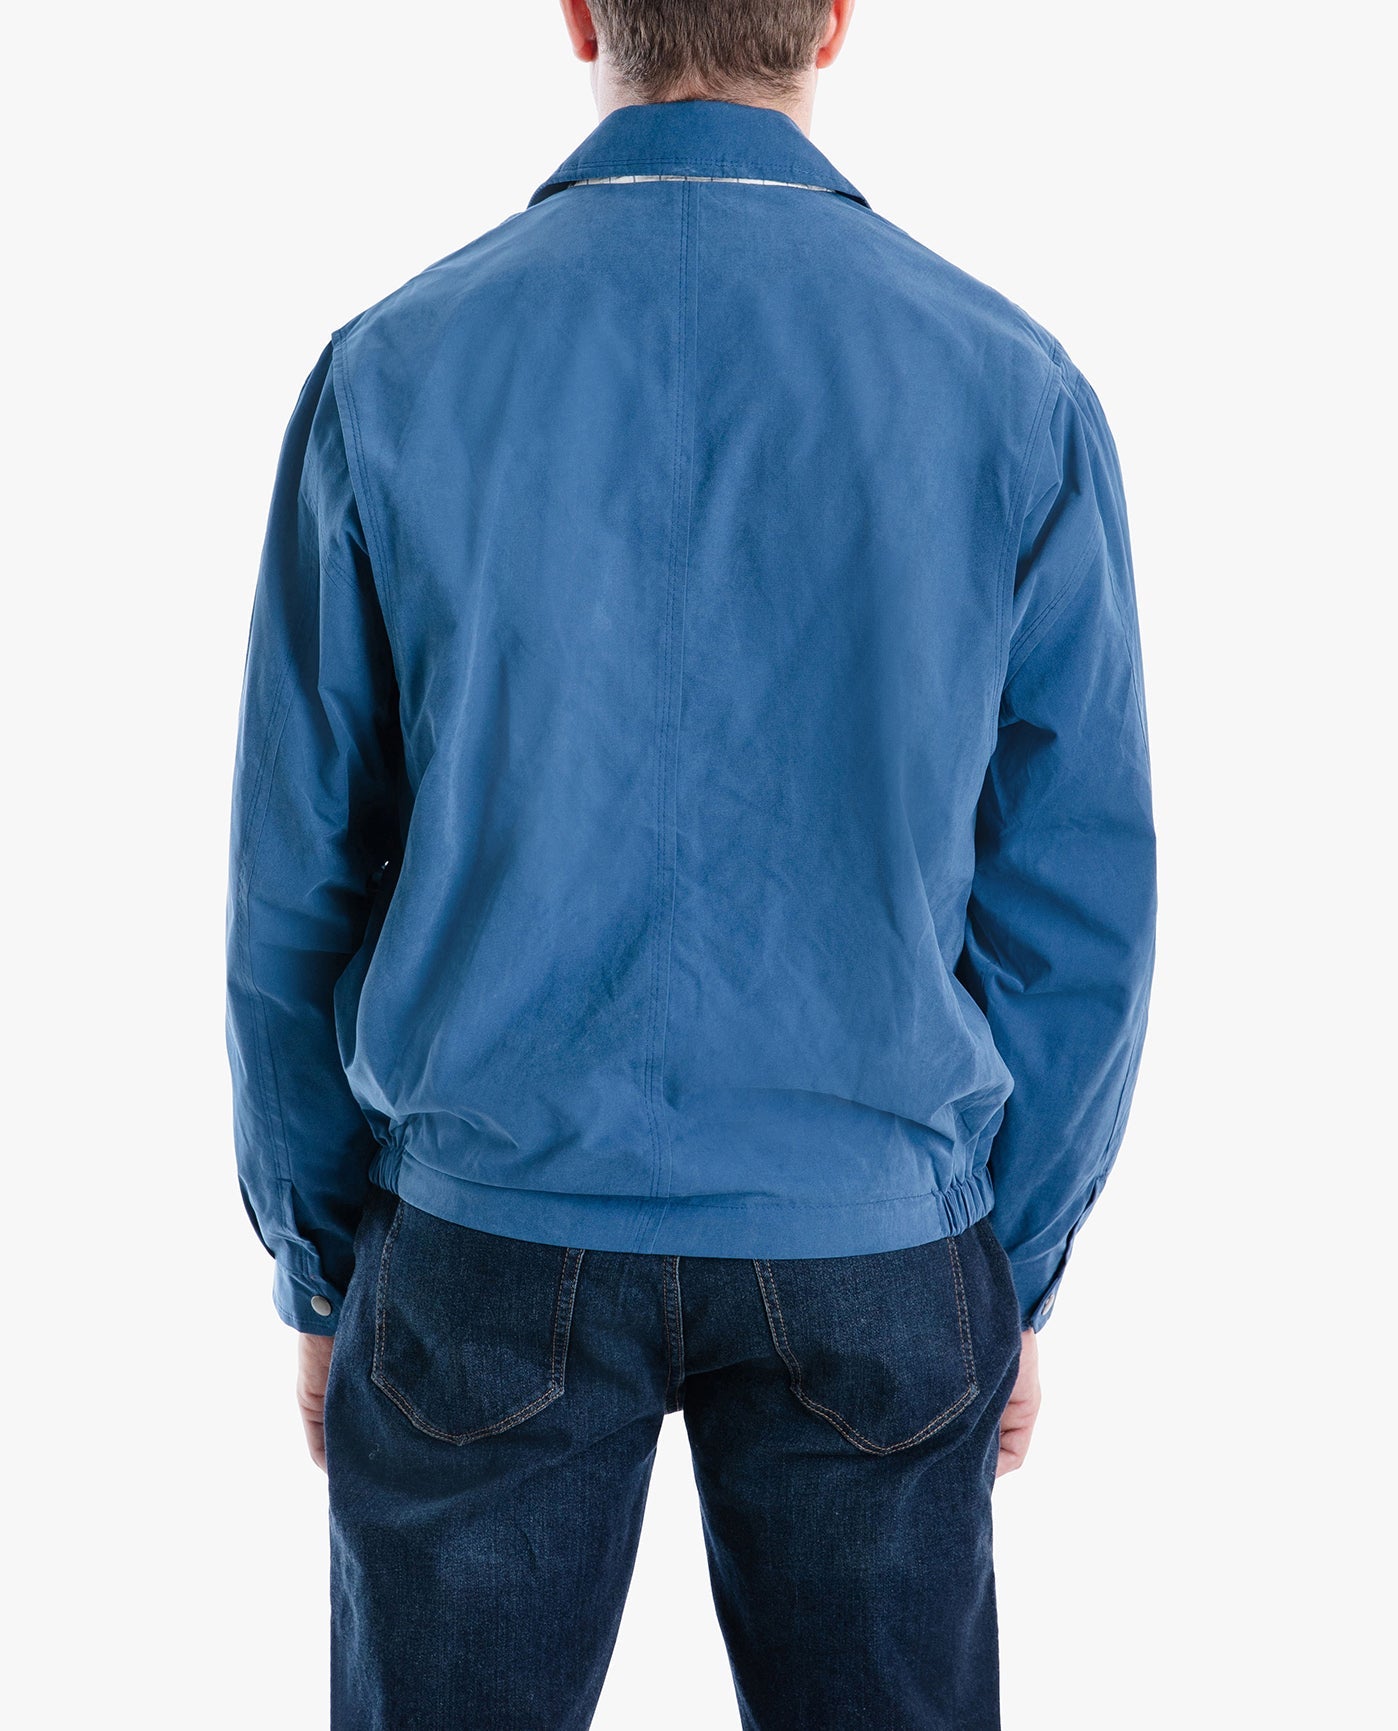 BACK VIEW OF LIGHT WEIGHT ZIP FRONT GOLF JACKET | PACIFIC BLUE